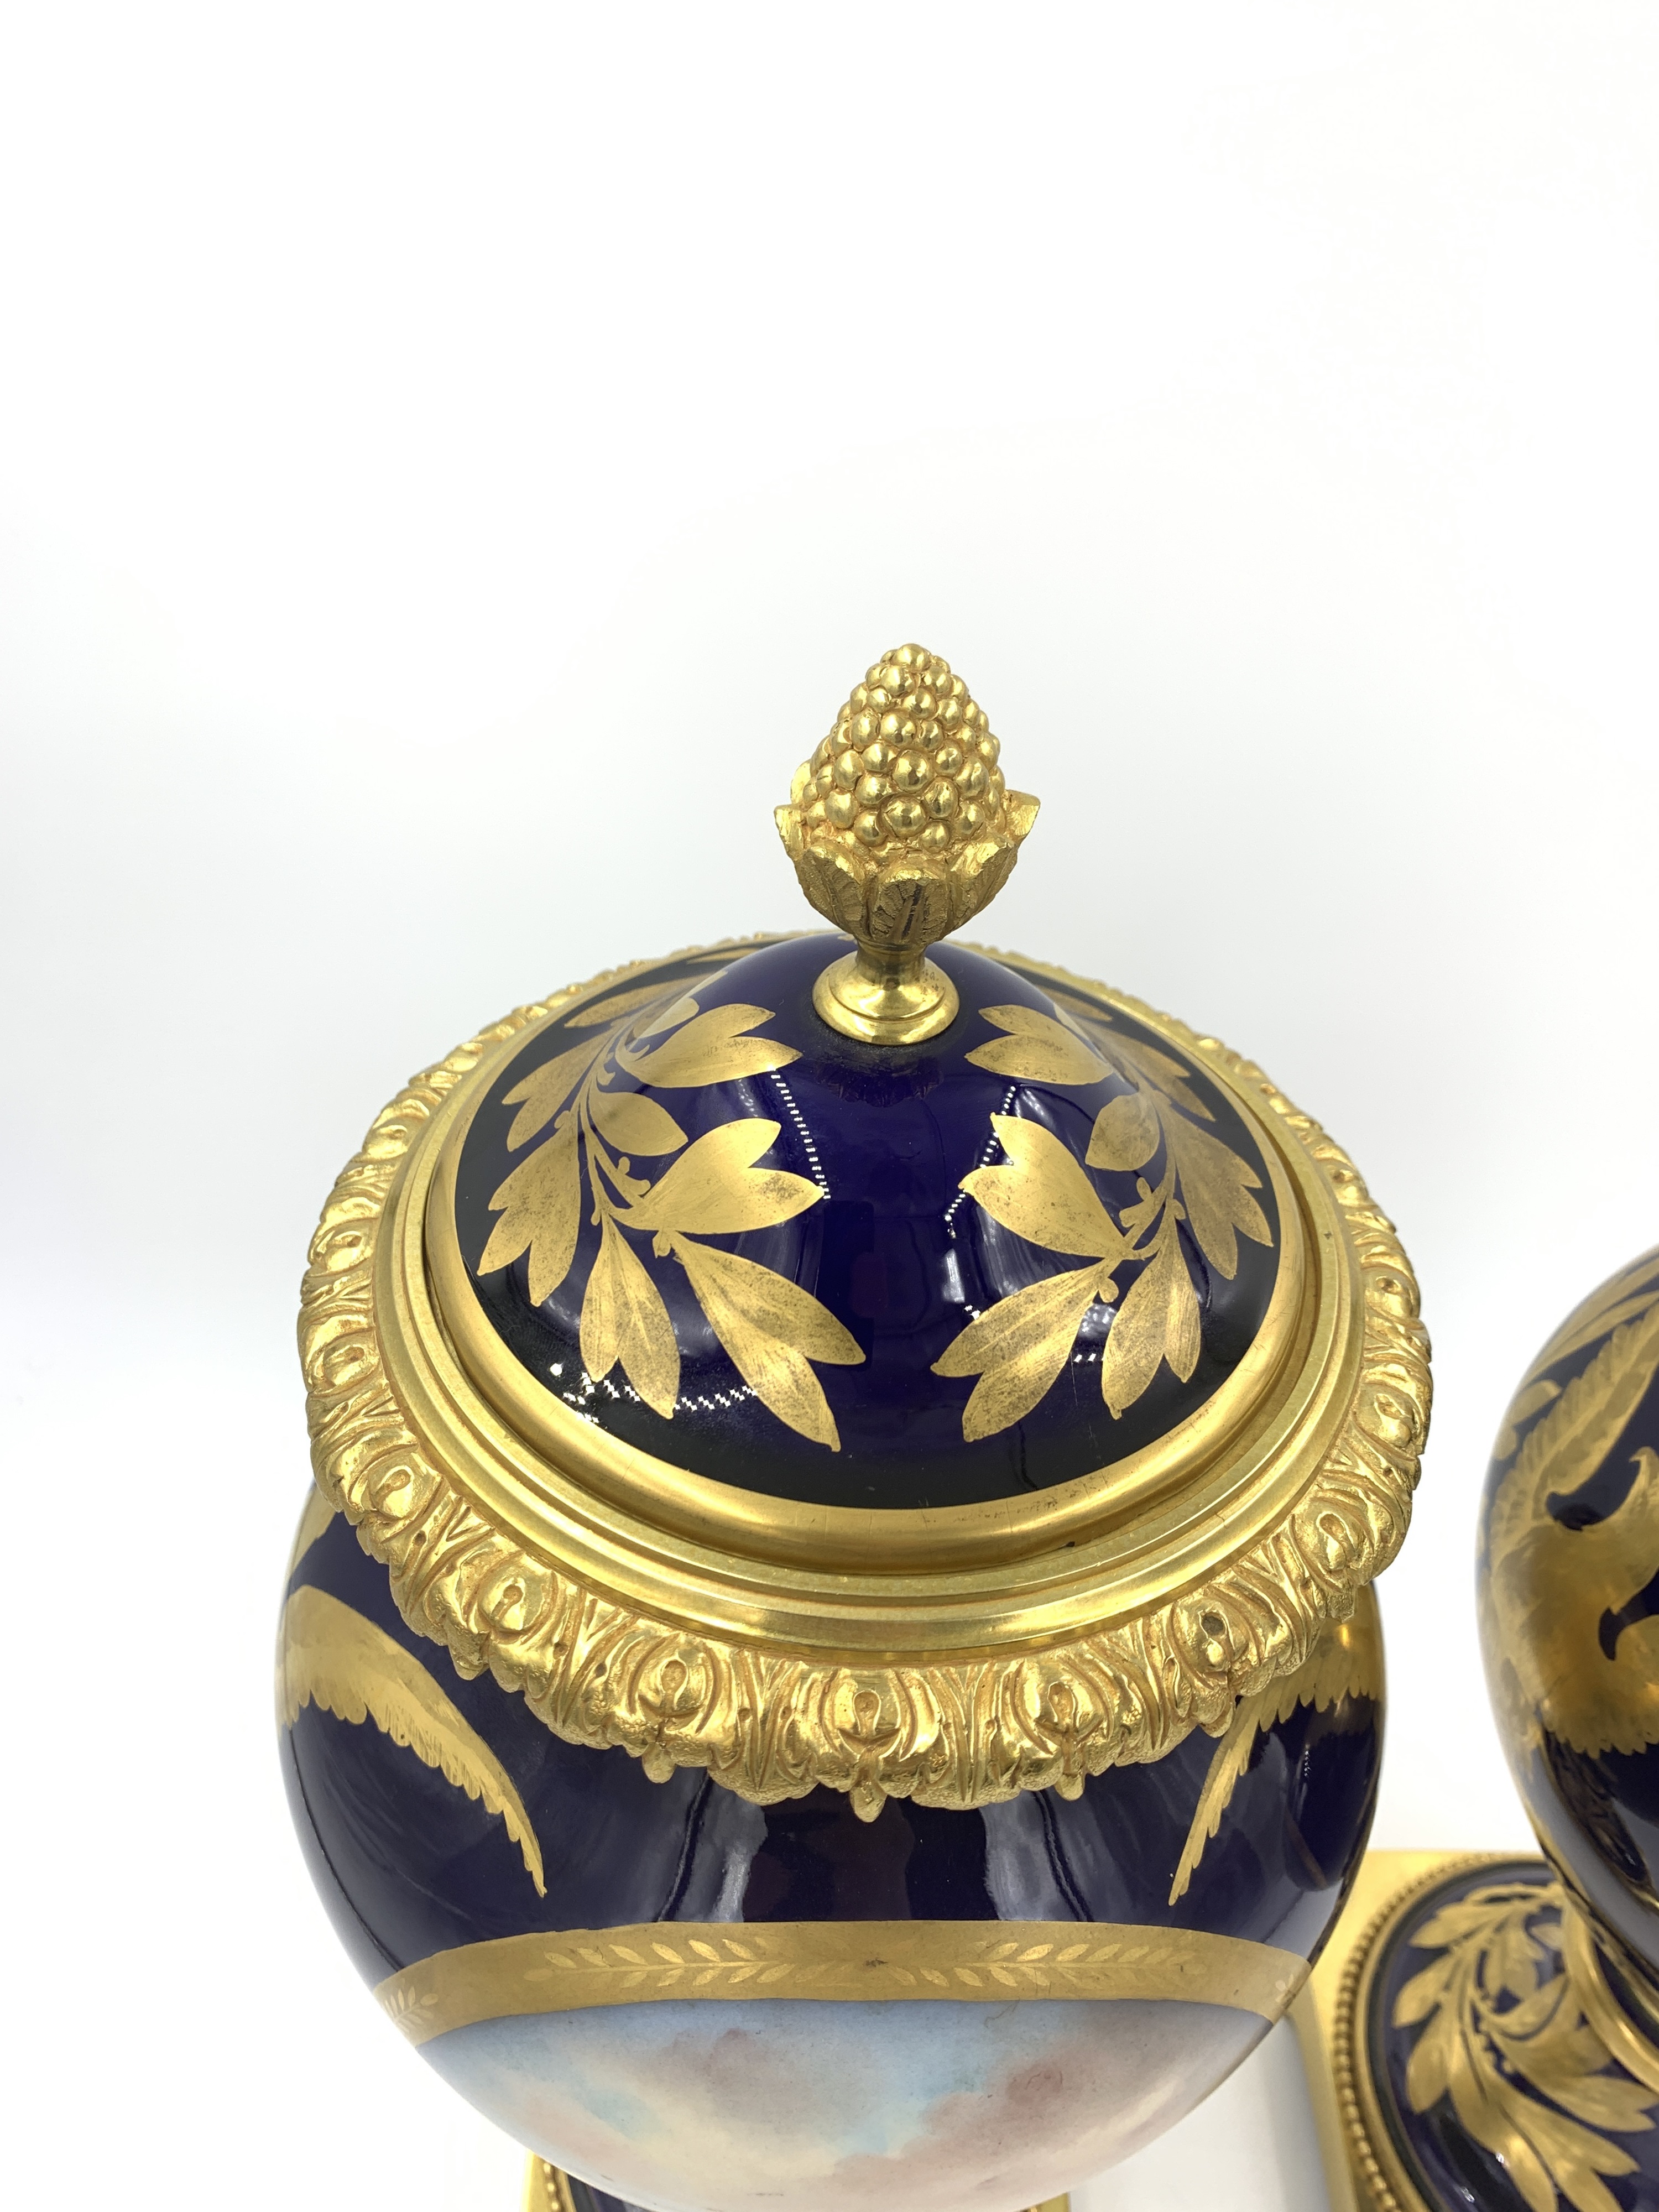 A FINE PAIR OF LATE 19TH / EARLY 20TH CENTURY SEVRES STYLE PORCELAIN NAPOLEON VASES - Image 14 of 14